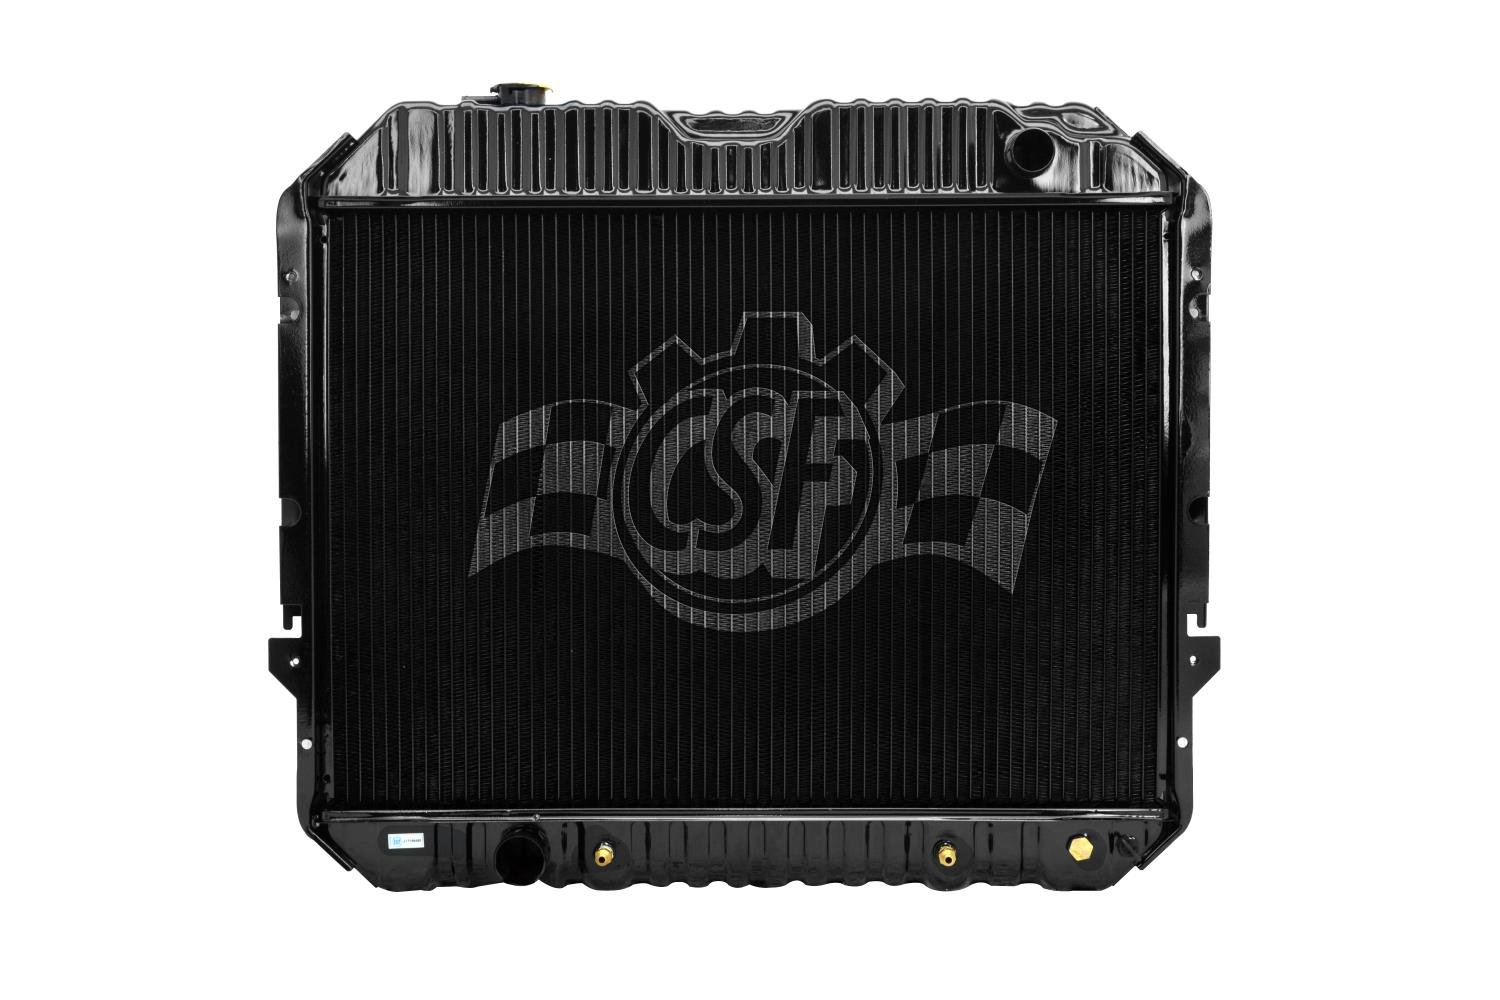 OE-Style 3-Row Radiator, Fits Select Ford E-Series